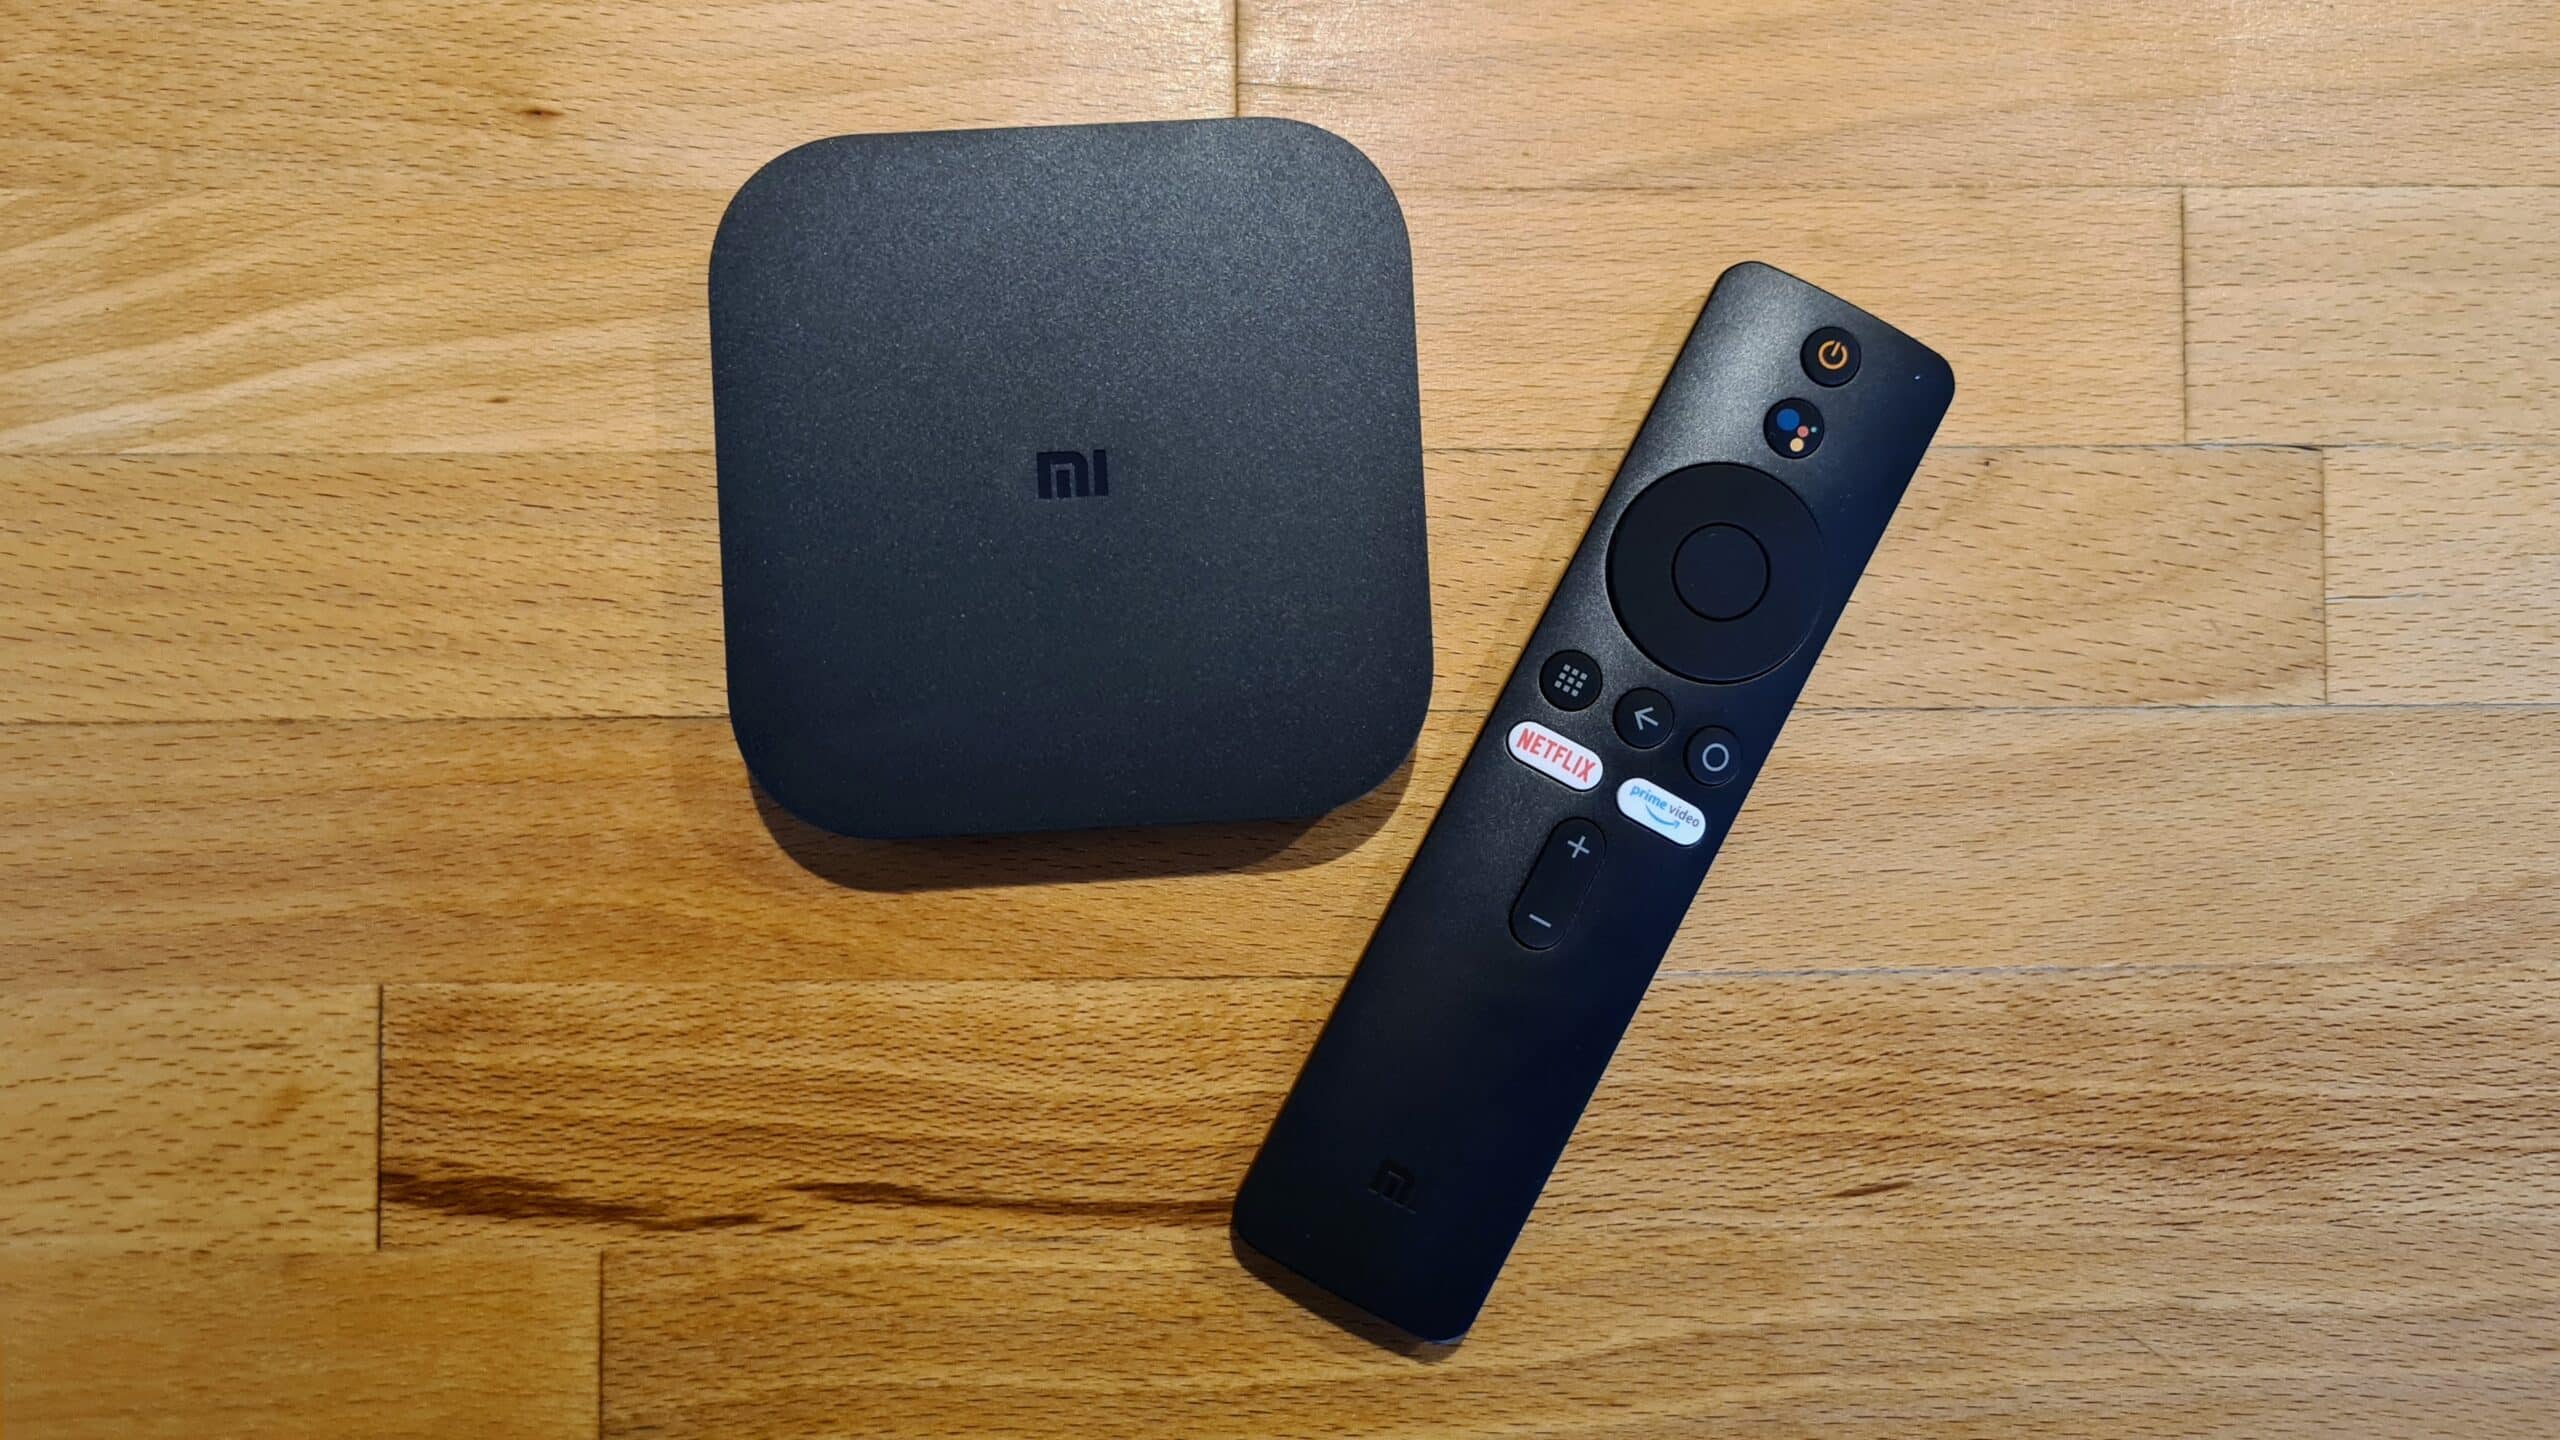 Xiaomi Mi TV Box - one of the best TV boxes